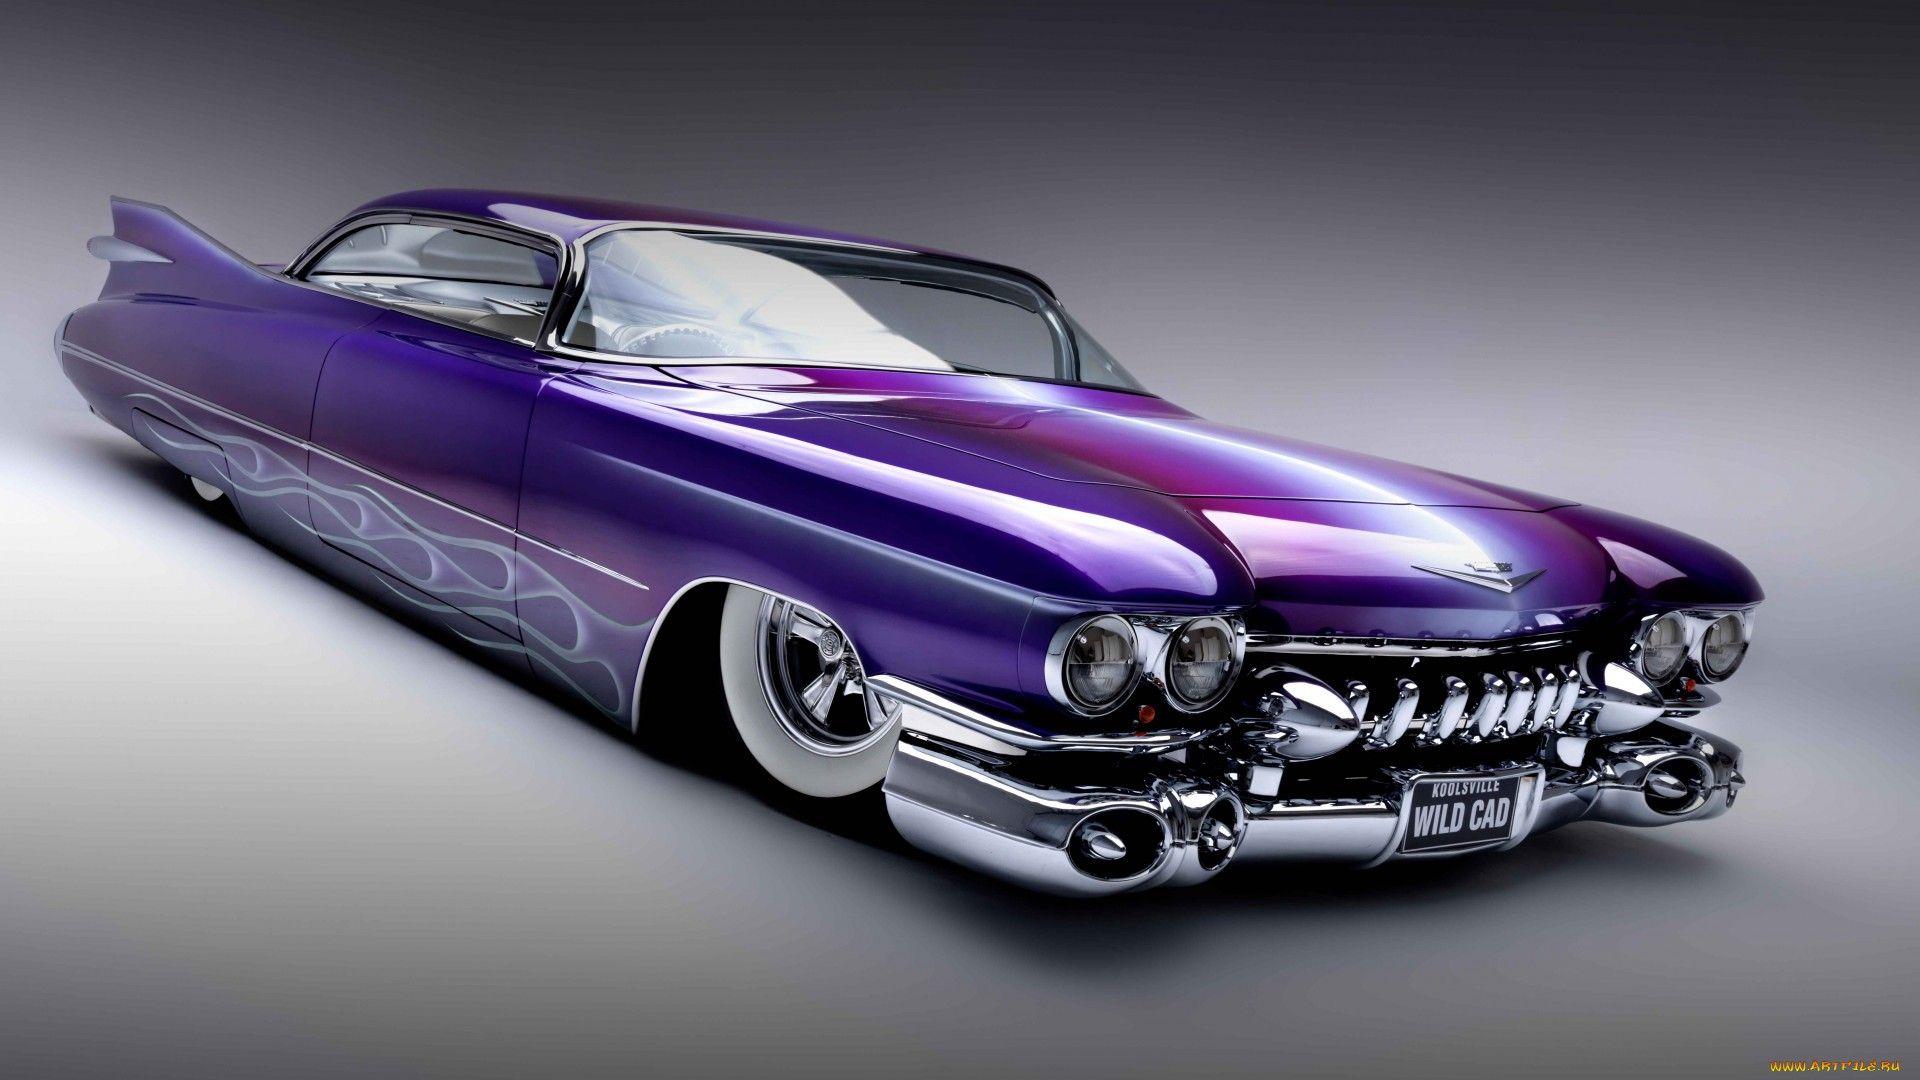 Best Lowrider Car Wallpaper Free High Resolution Background Of